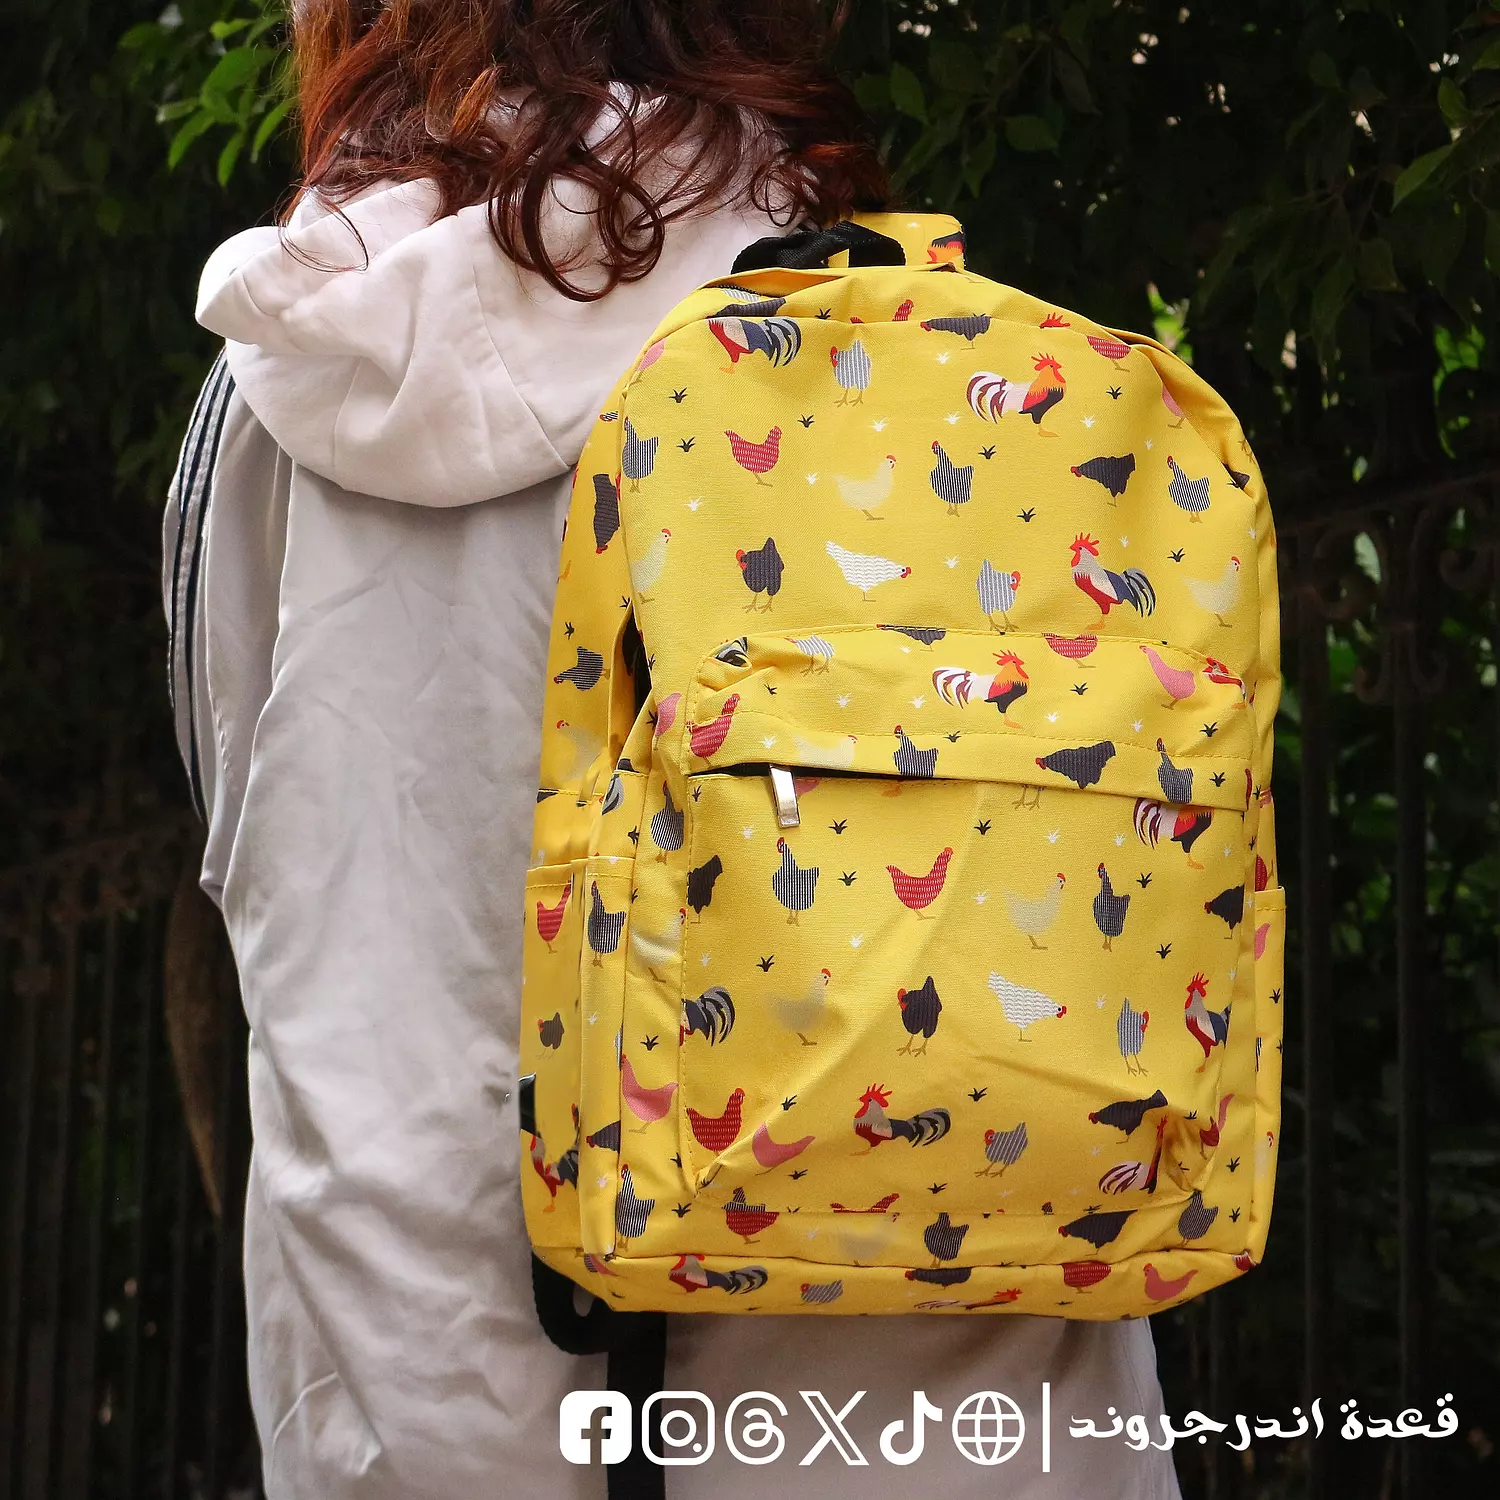 Chickens 🐓 Backpack 🎒 hover image